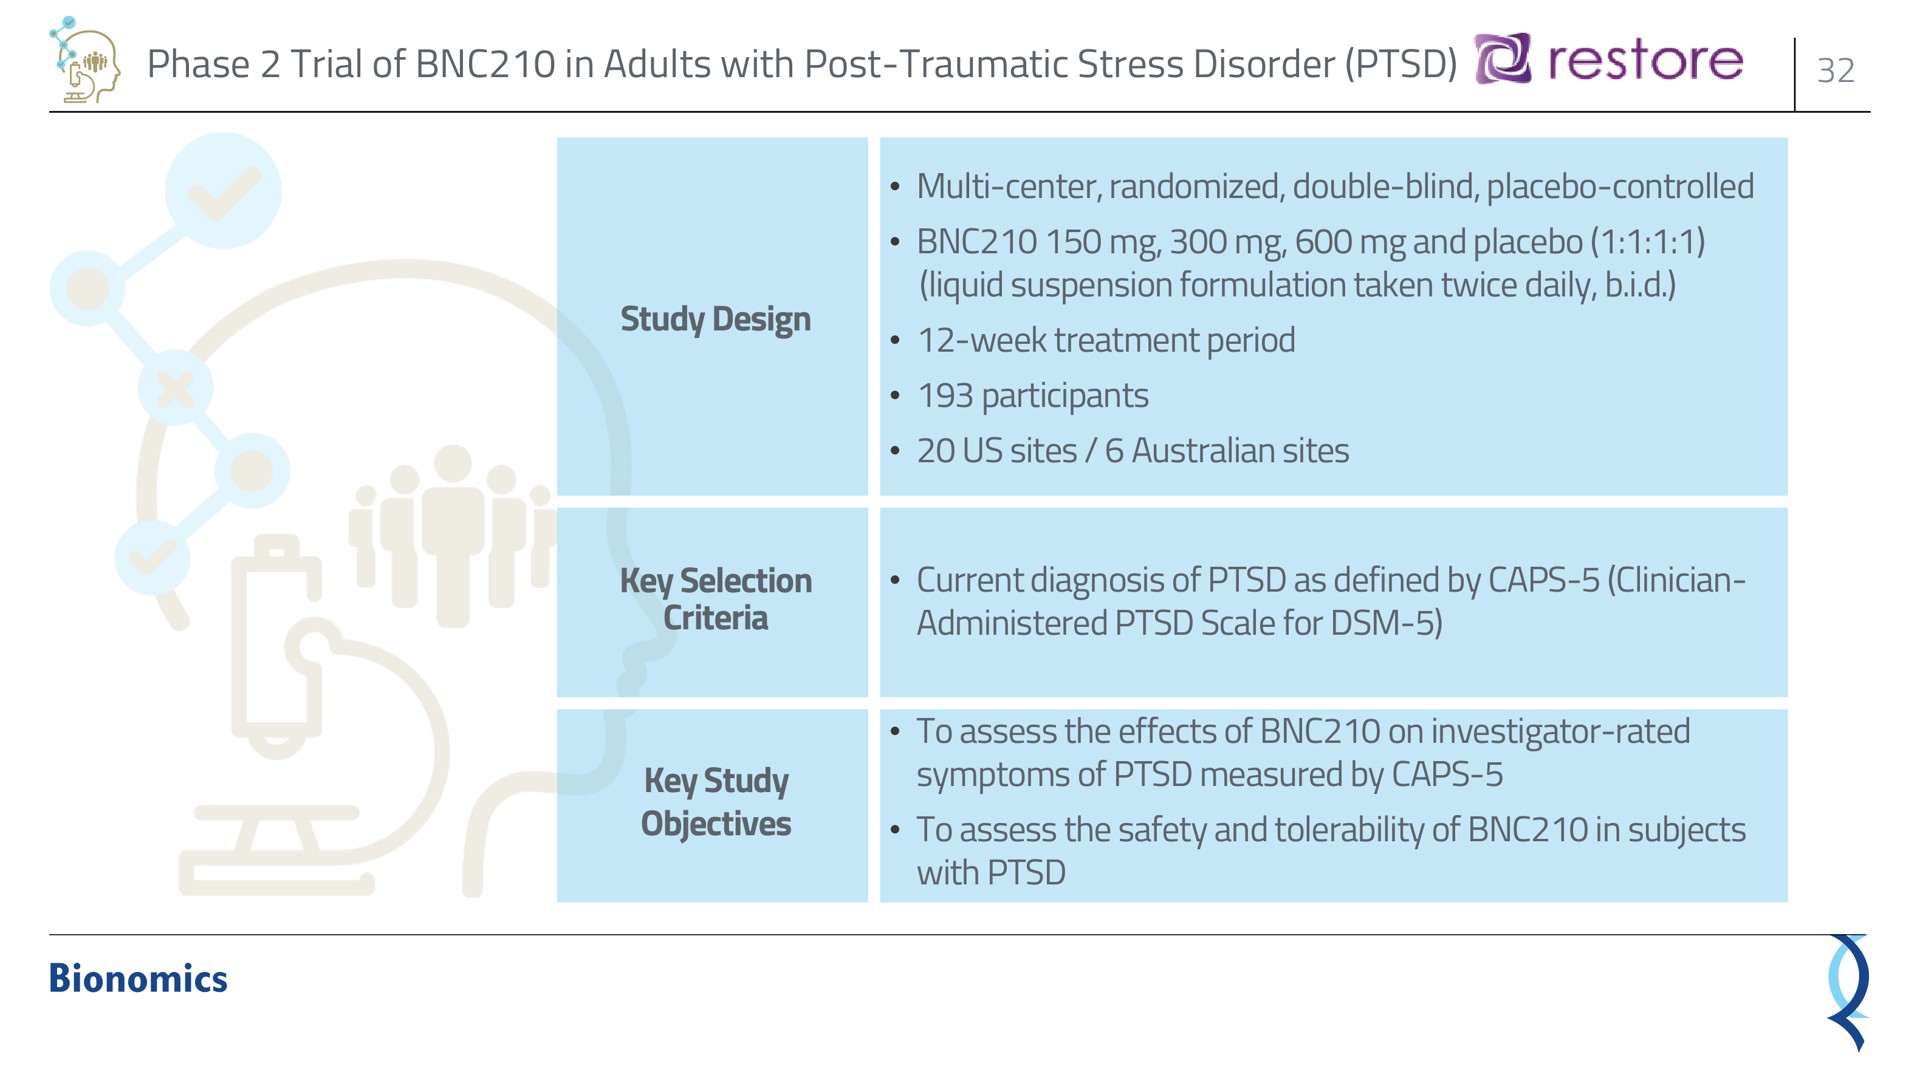 phase trial of in adults with post traumatic stress disorder study design center randomized double blind placebo controlled and placebo liquid suspension formulation taken twice daily i week treatment period participants us sites sites key selection criteria current diagnosis of as defined by caps clinician administered scale for key study objectives to assess the effects of on investigator rated symptoms of measured by caps to assess the safety and tolerability of in subjects with be restore | Bionomics